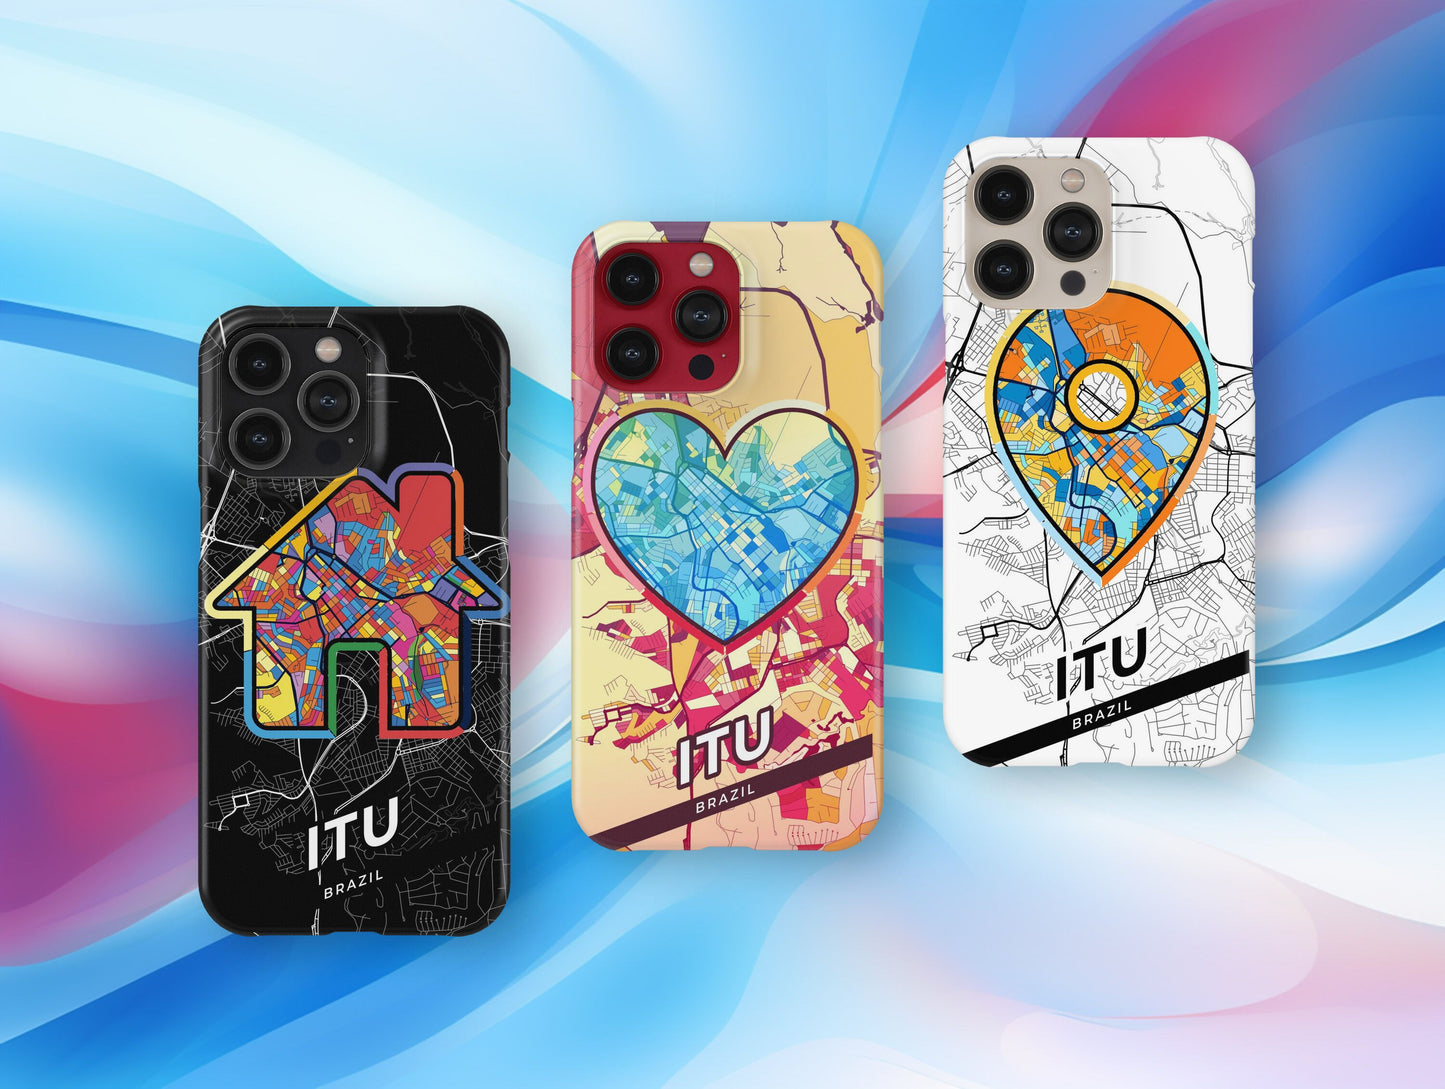 Itu Brazil slim phone case with colorful icon. Birthday, wedding or housewarming gift. Couple match cases.